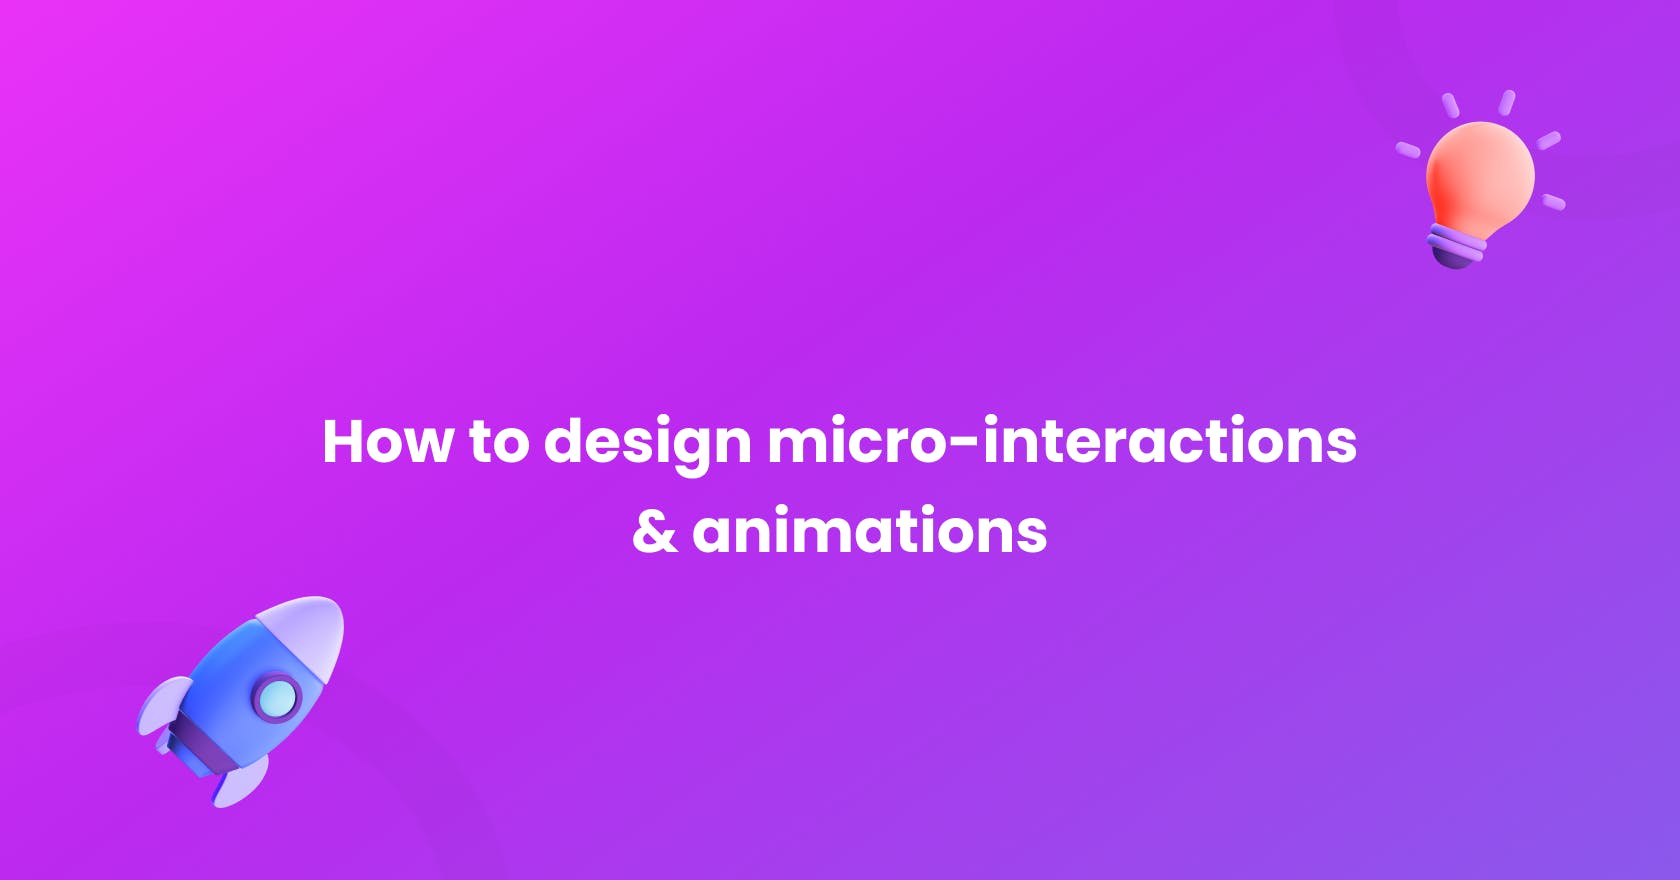 Nightborn - How to design micro-interactions & animations